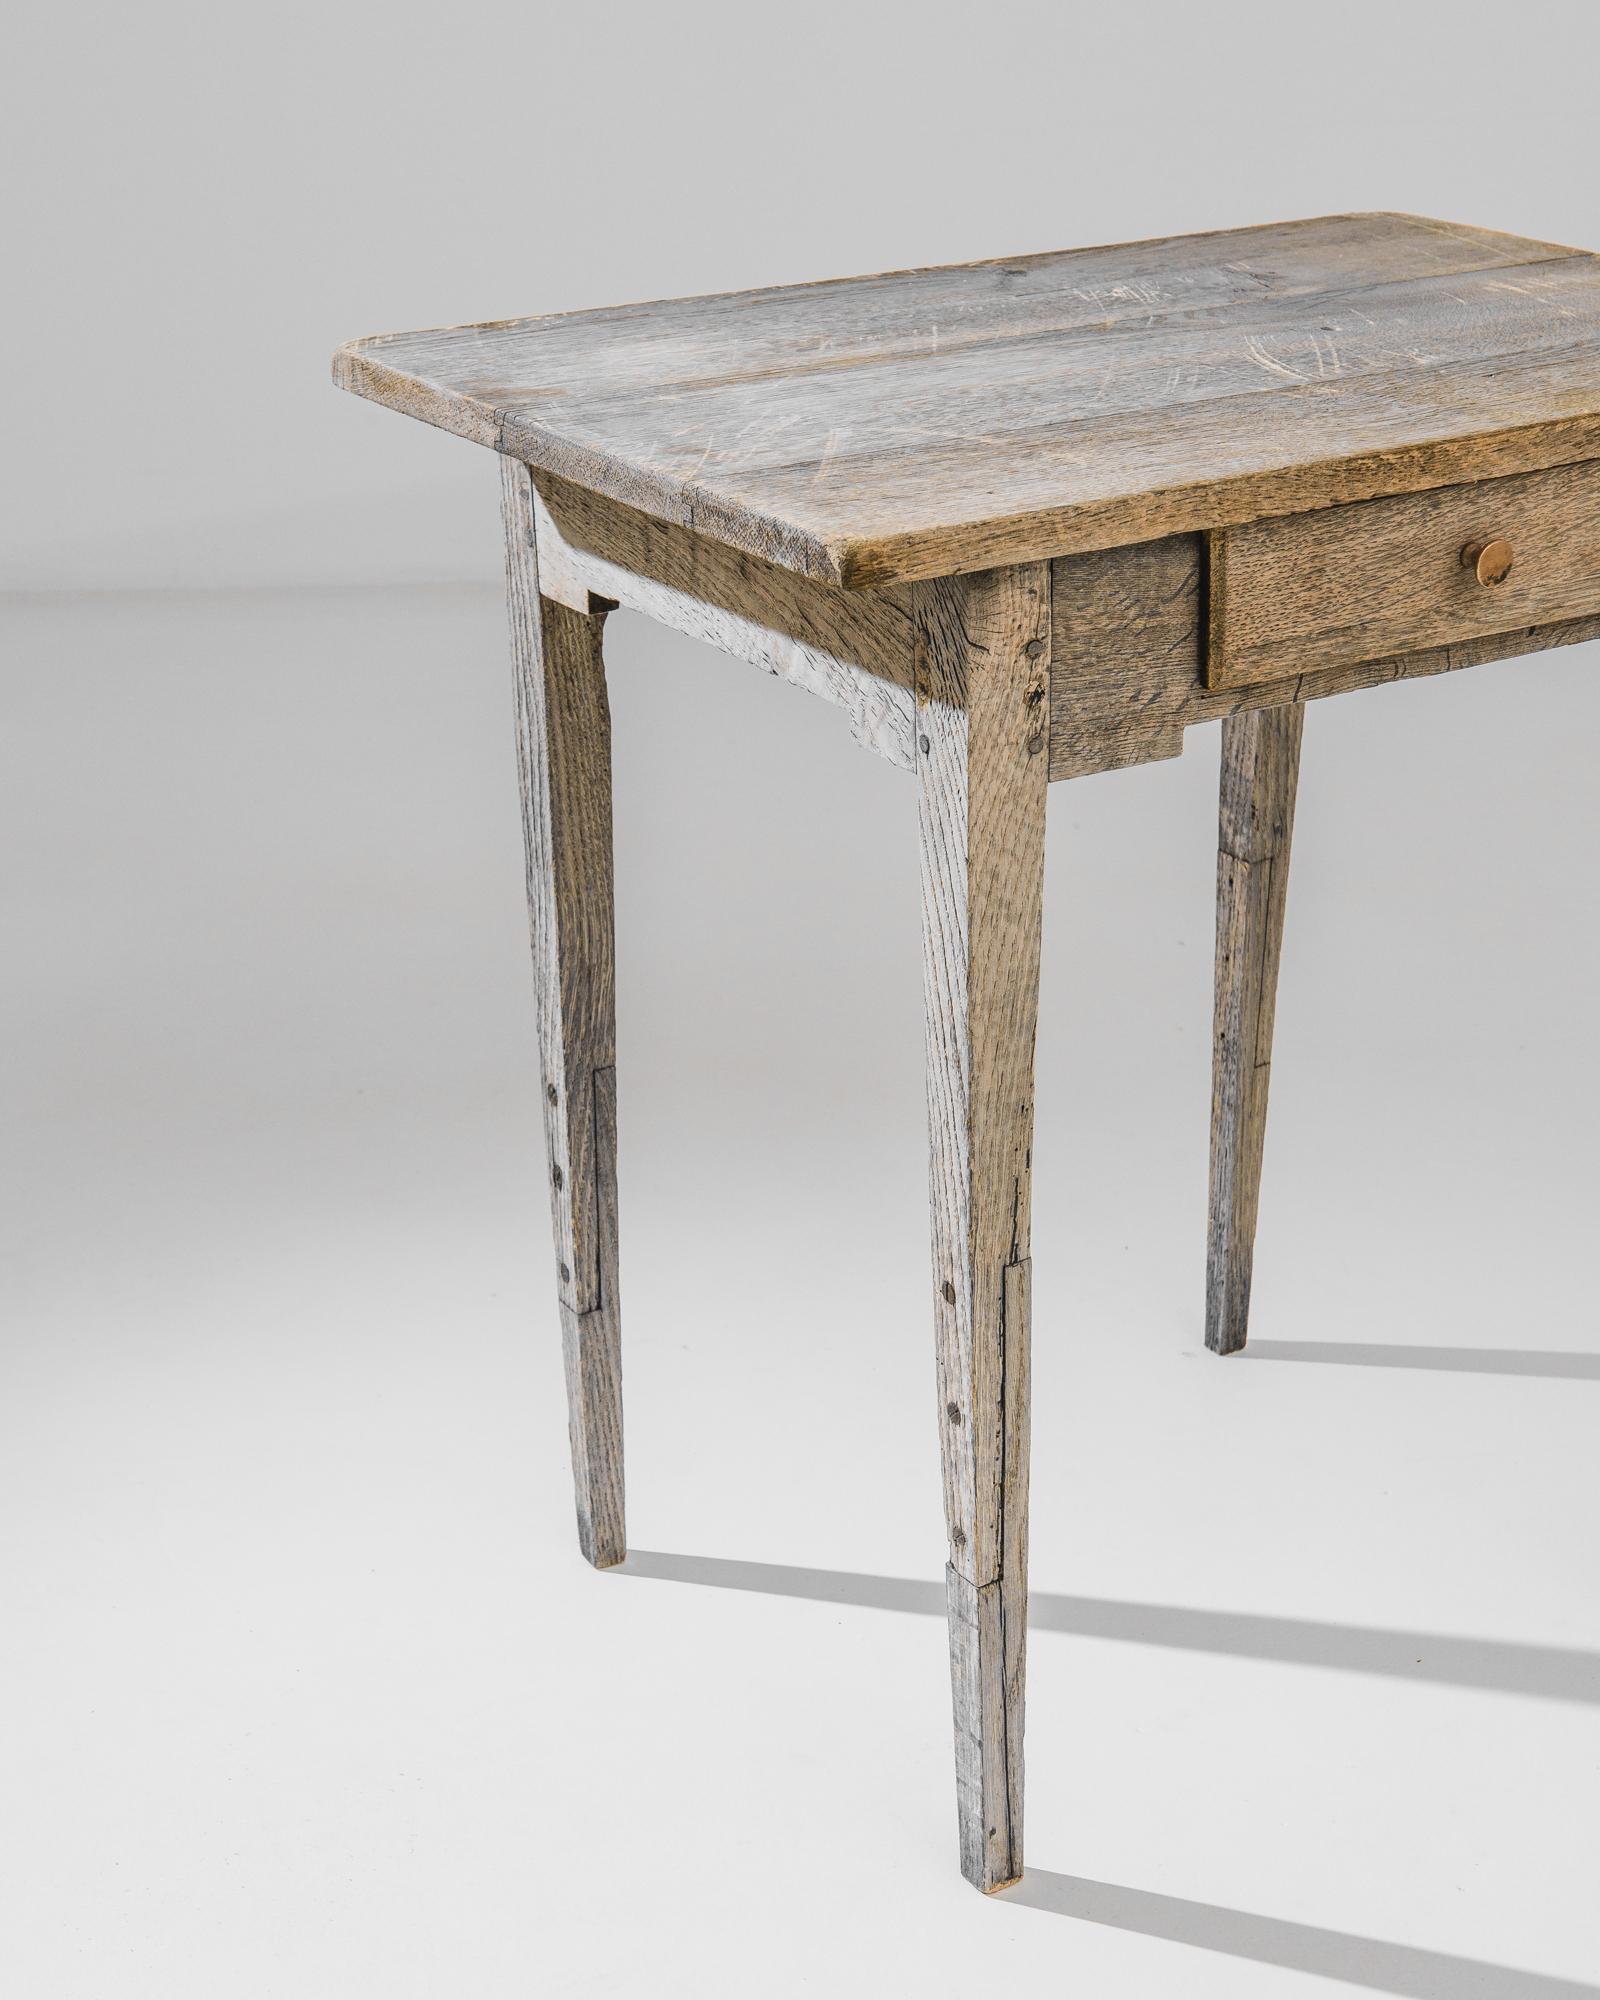 A bleached oak table from France produced circa 1880. Featuring a single sliding drawer tucked into a deep apron underneath a gray plain of a tabletop, this leggy little occasional table is ready for action. Each leg is extended with a stilt